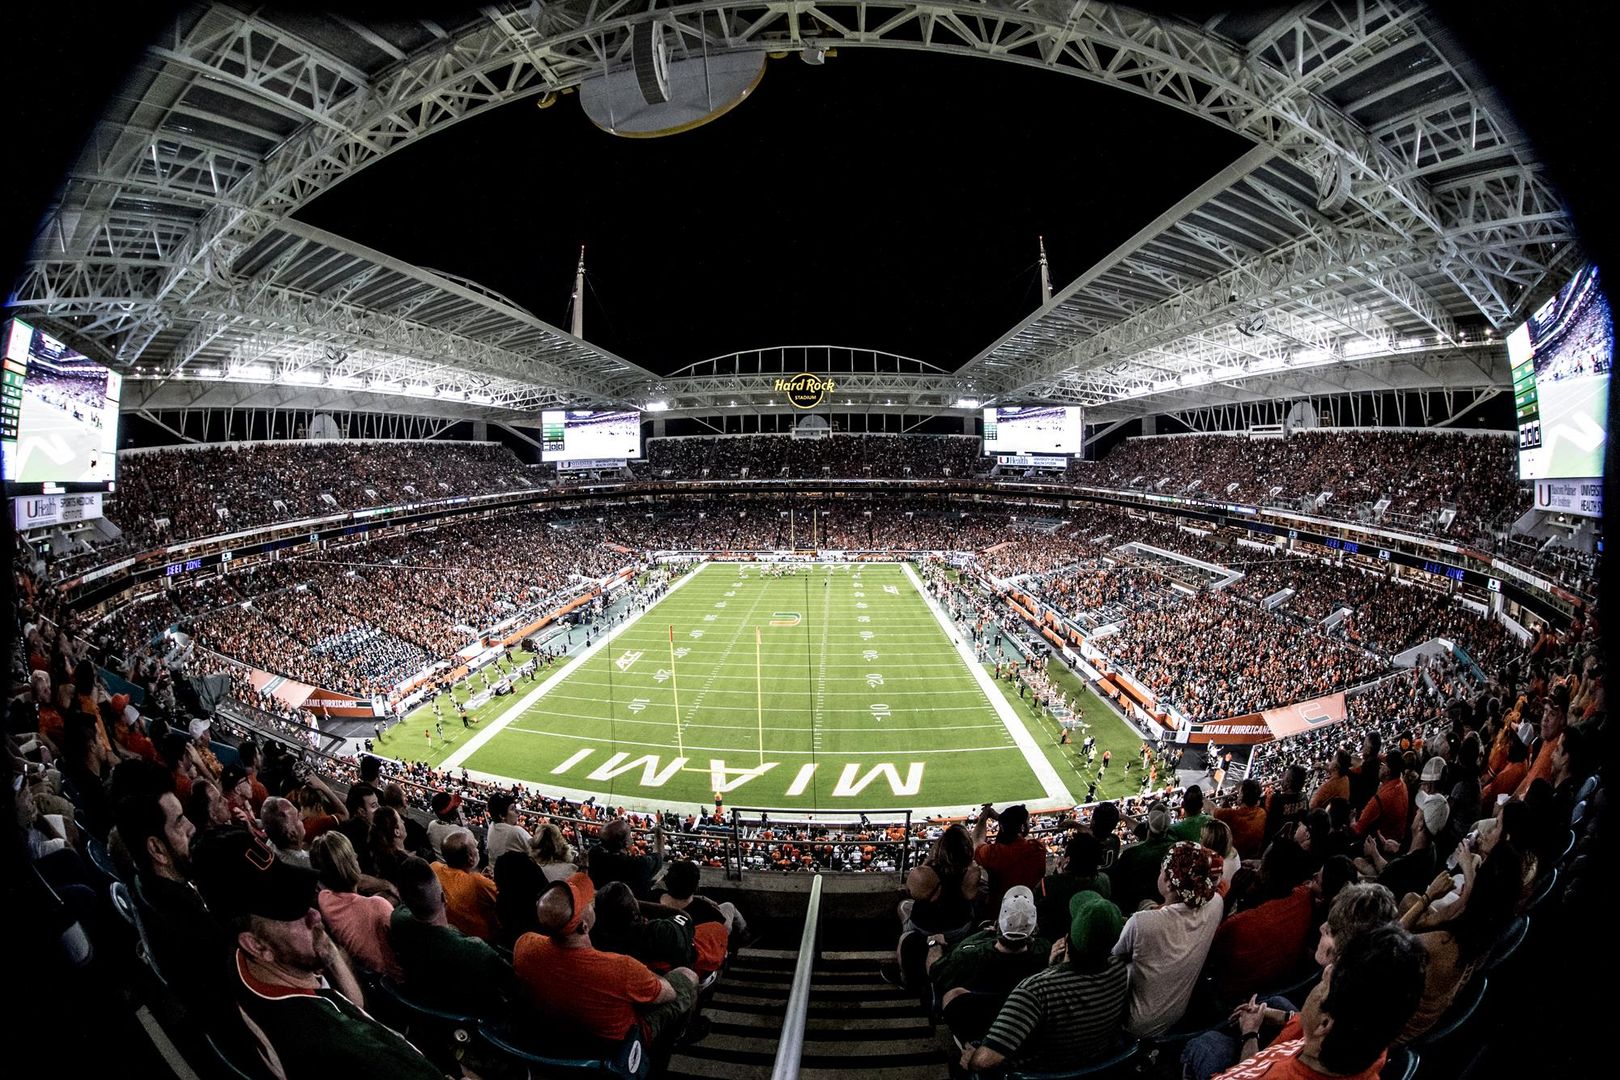 Pride Air Conditioning & Appliances Cool Off Miami Hurricane Fans For 2018 Football Season